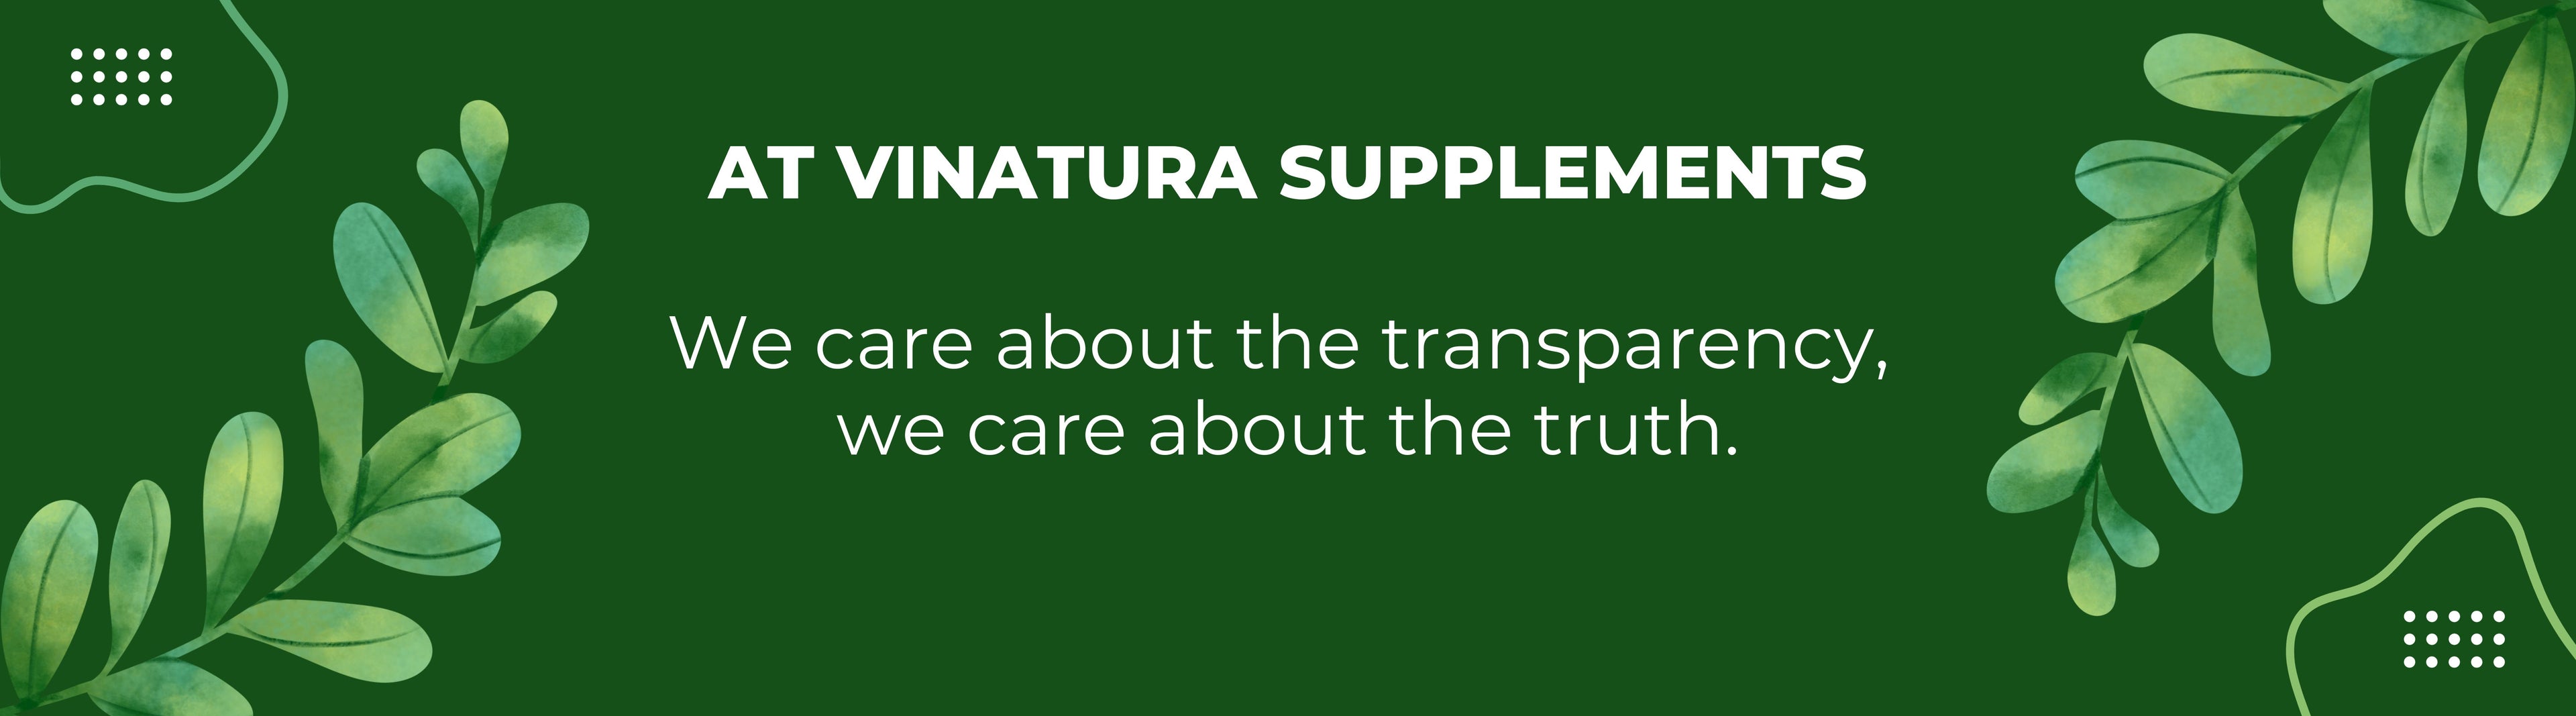 At Vinatura Supplements, We care about the transparency, we care  about the truth.